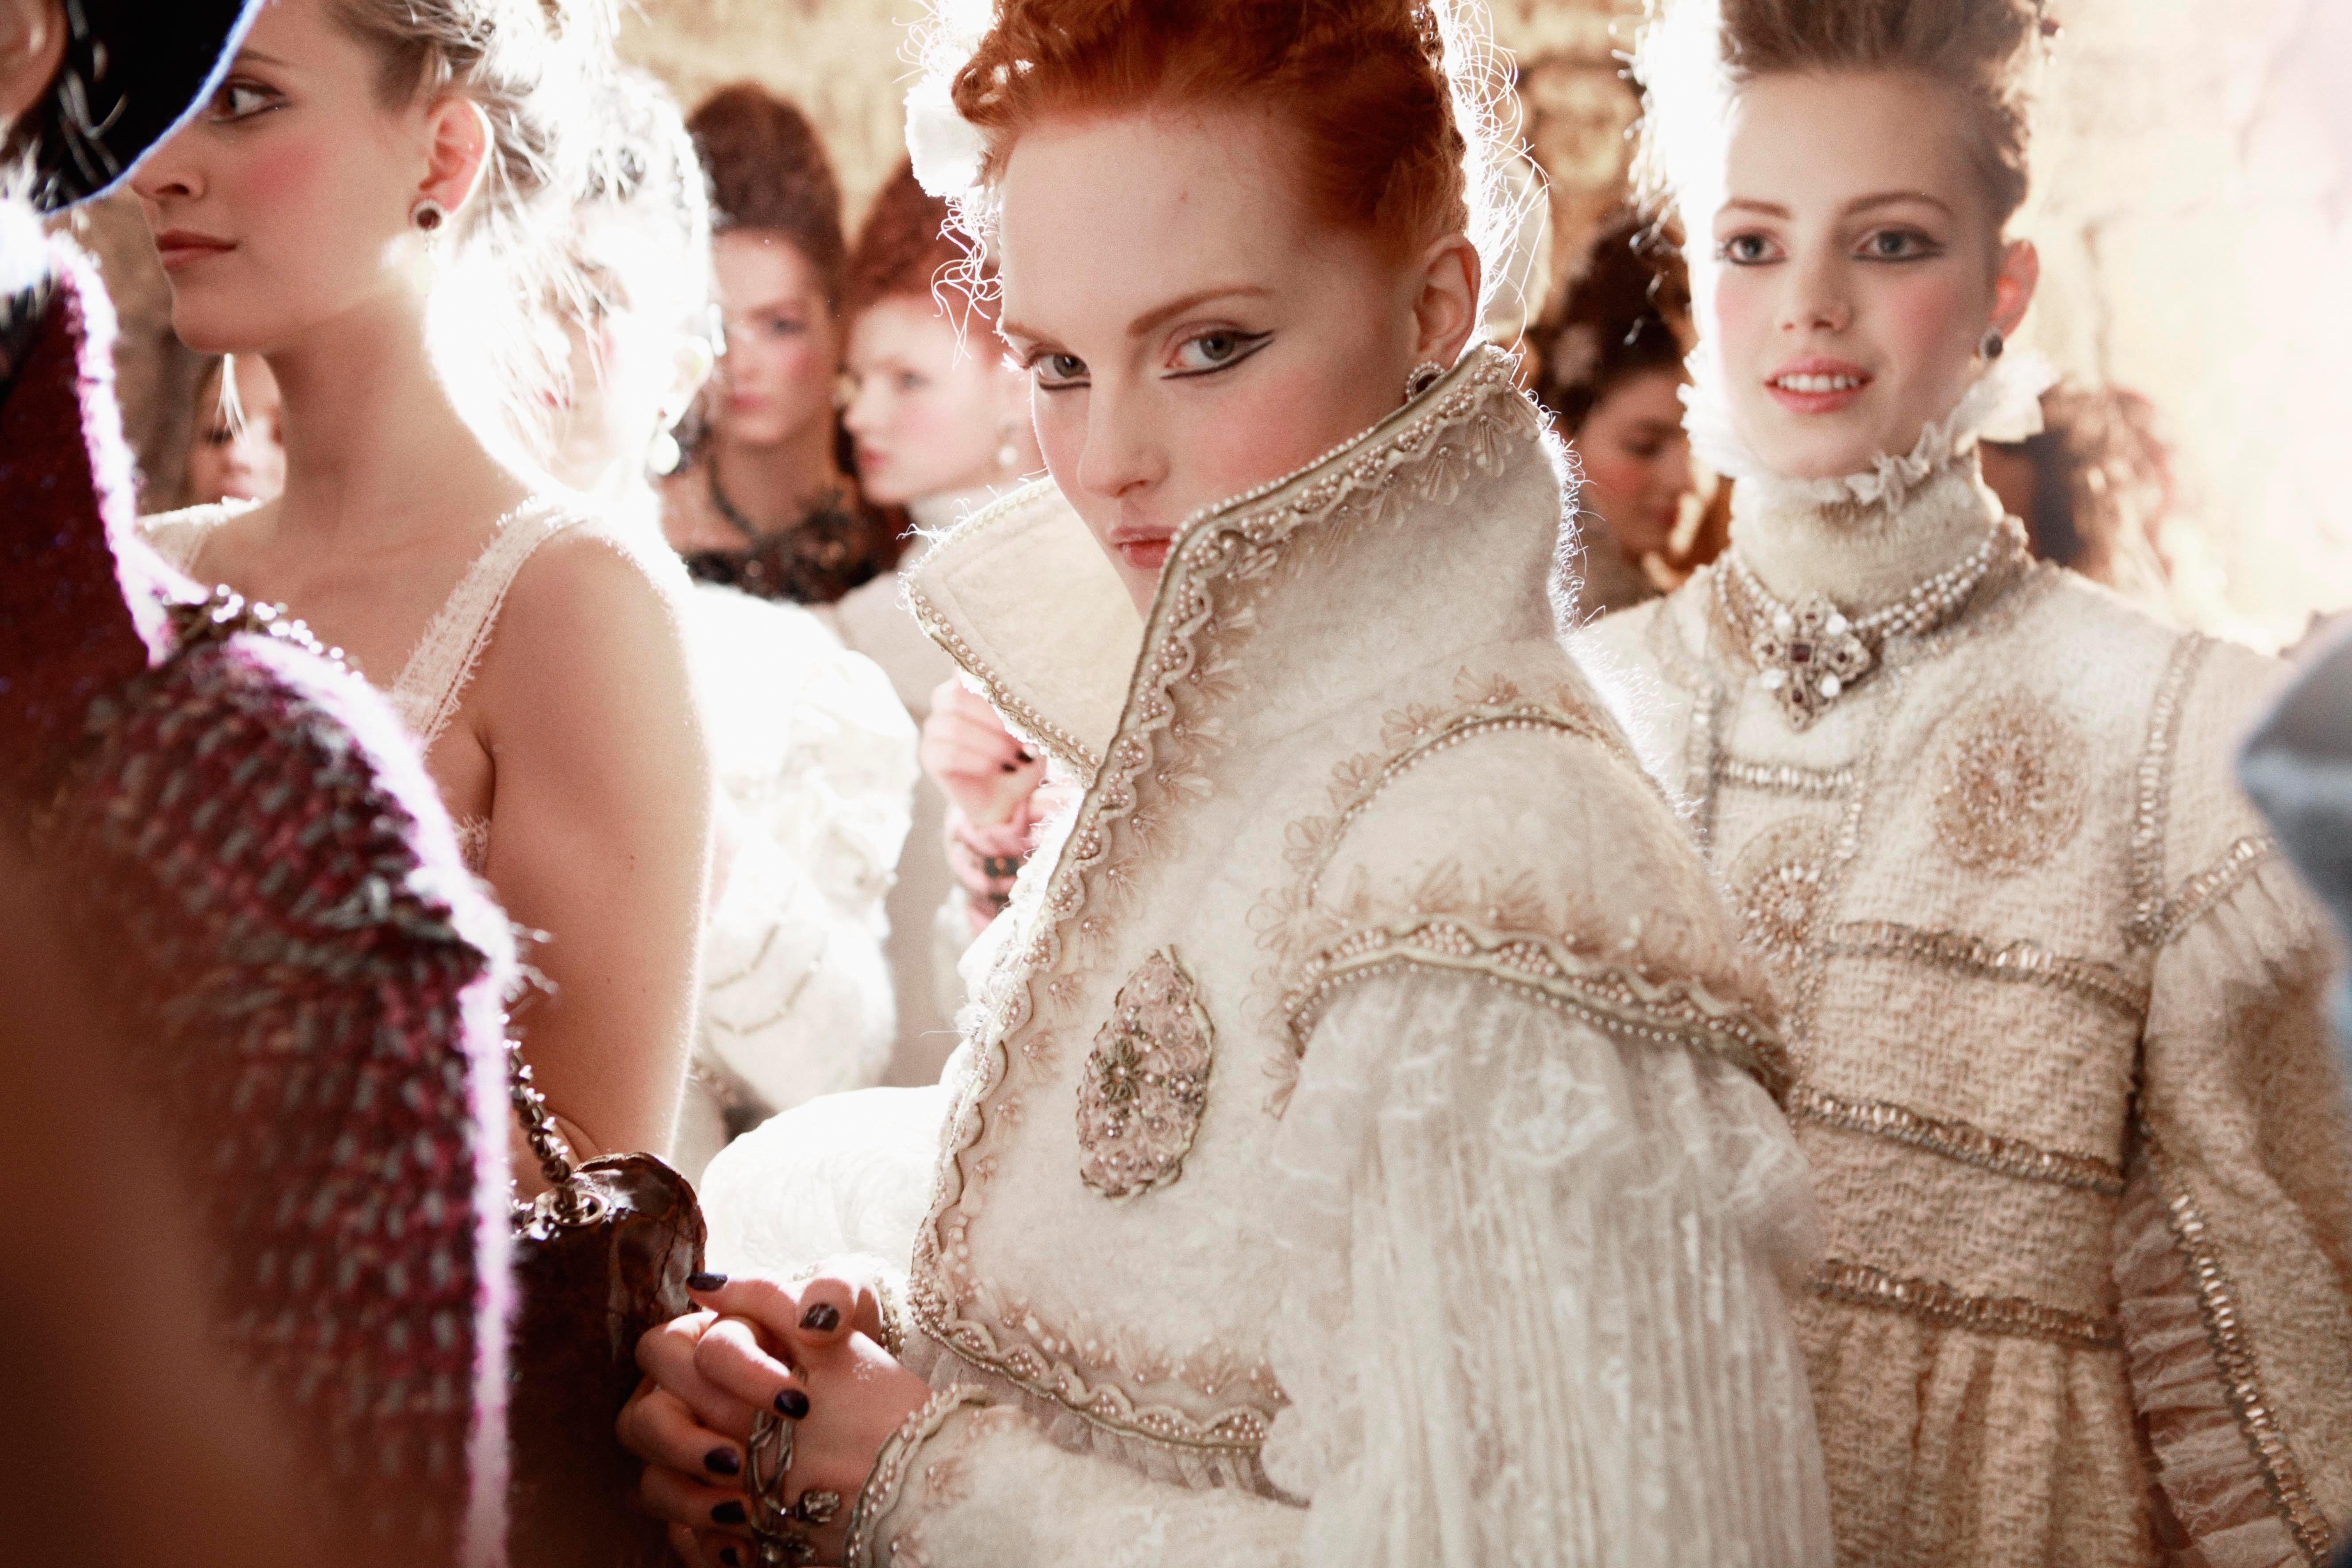 An intimate glimpse of Karl Lagerfeld backstage at Chanel's fashion shows